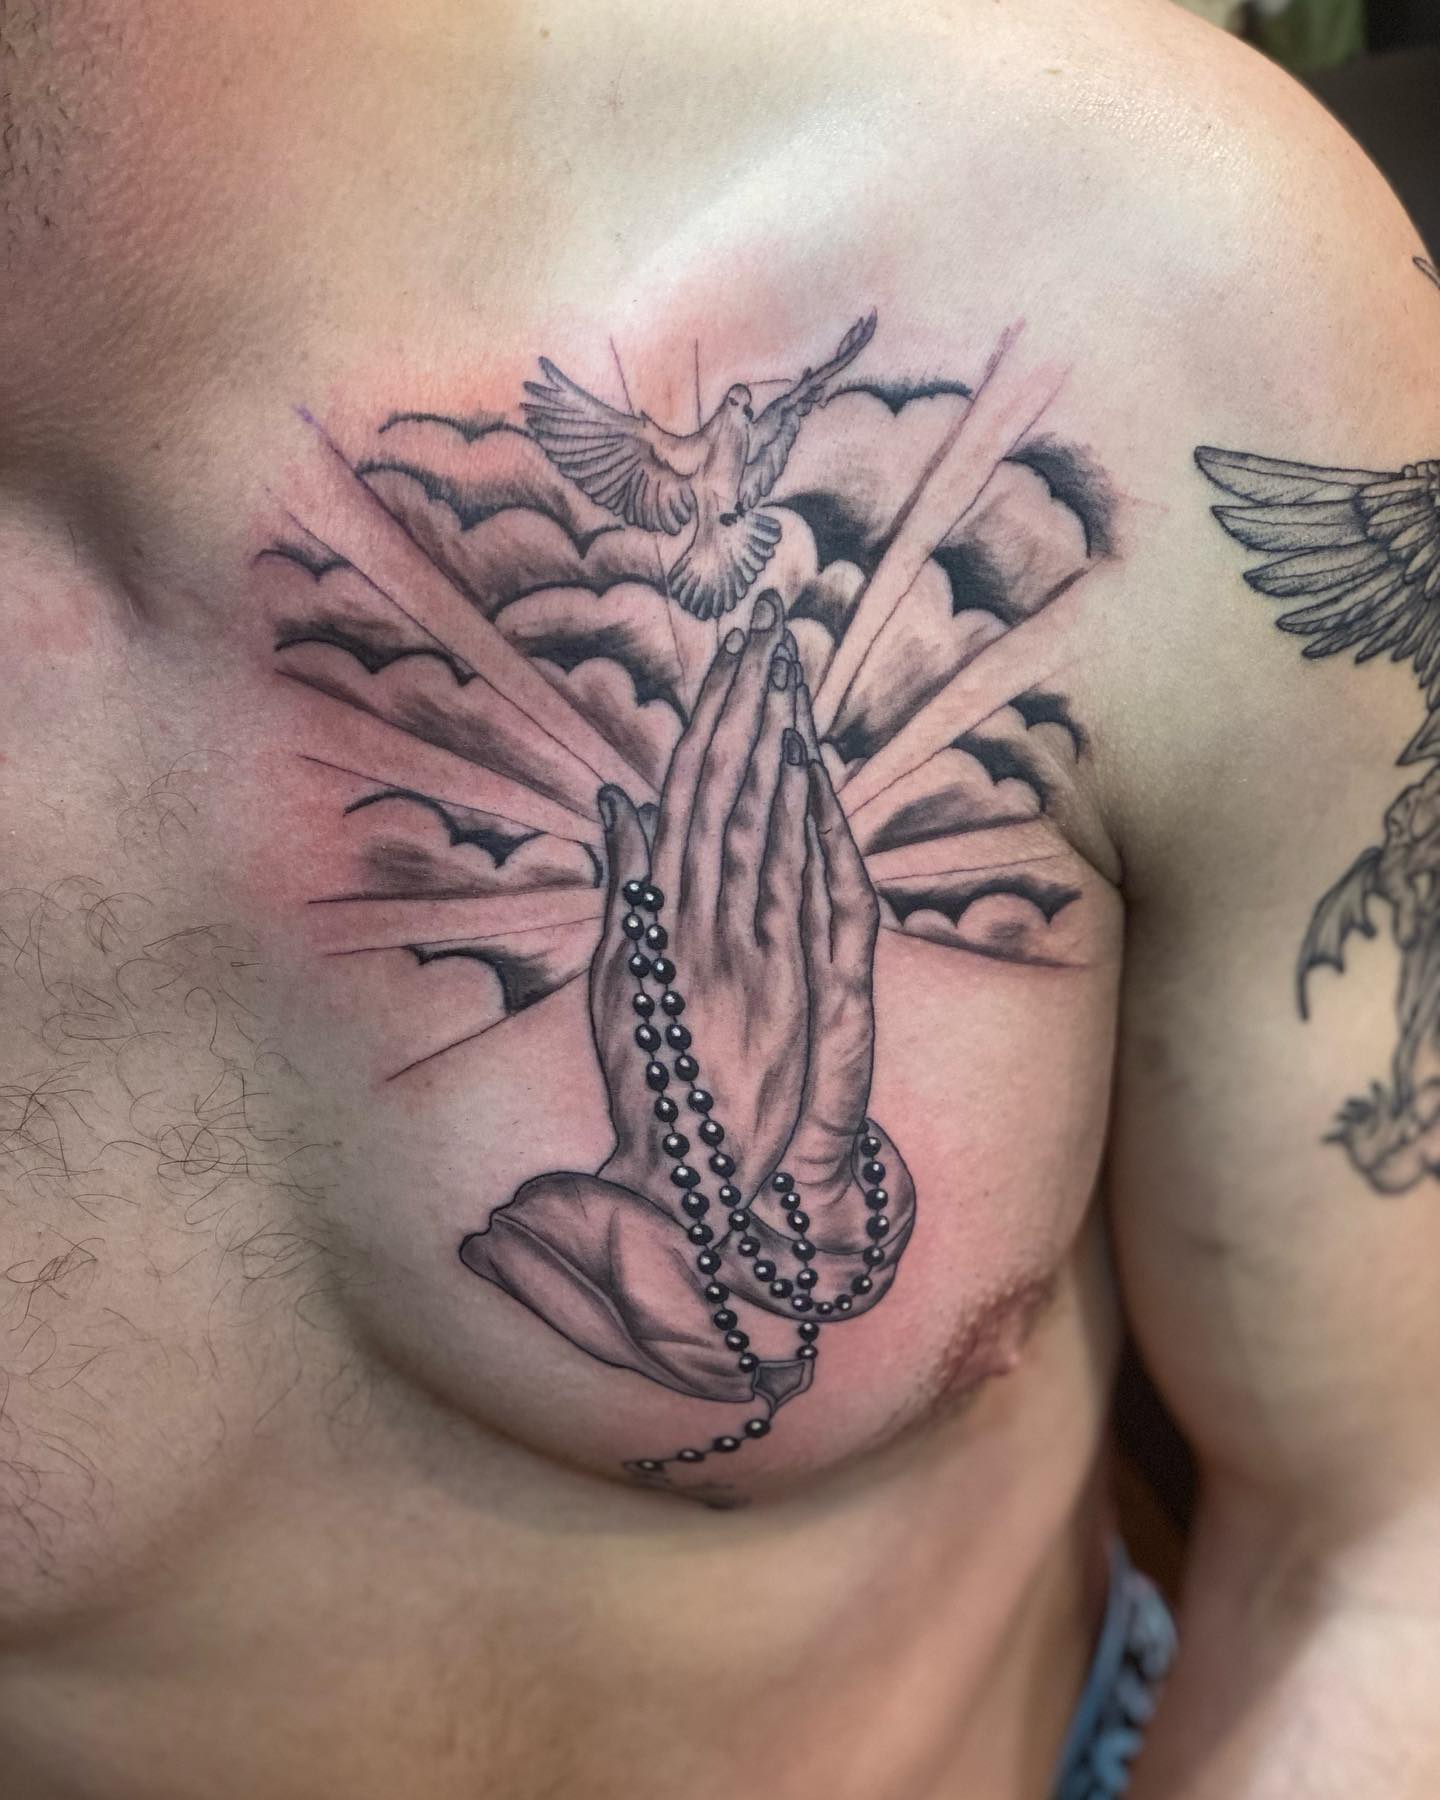 Generally, chest is the best location for this kind of mid-large size tattoos since the tattoo covers all of it. For your praying hands tattoo, this is a great one.